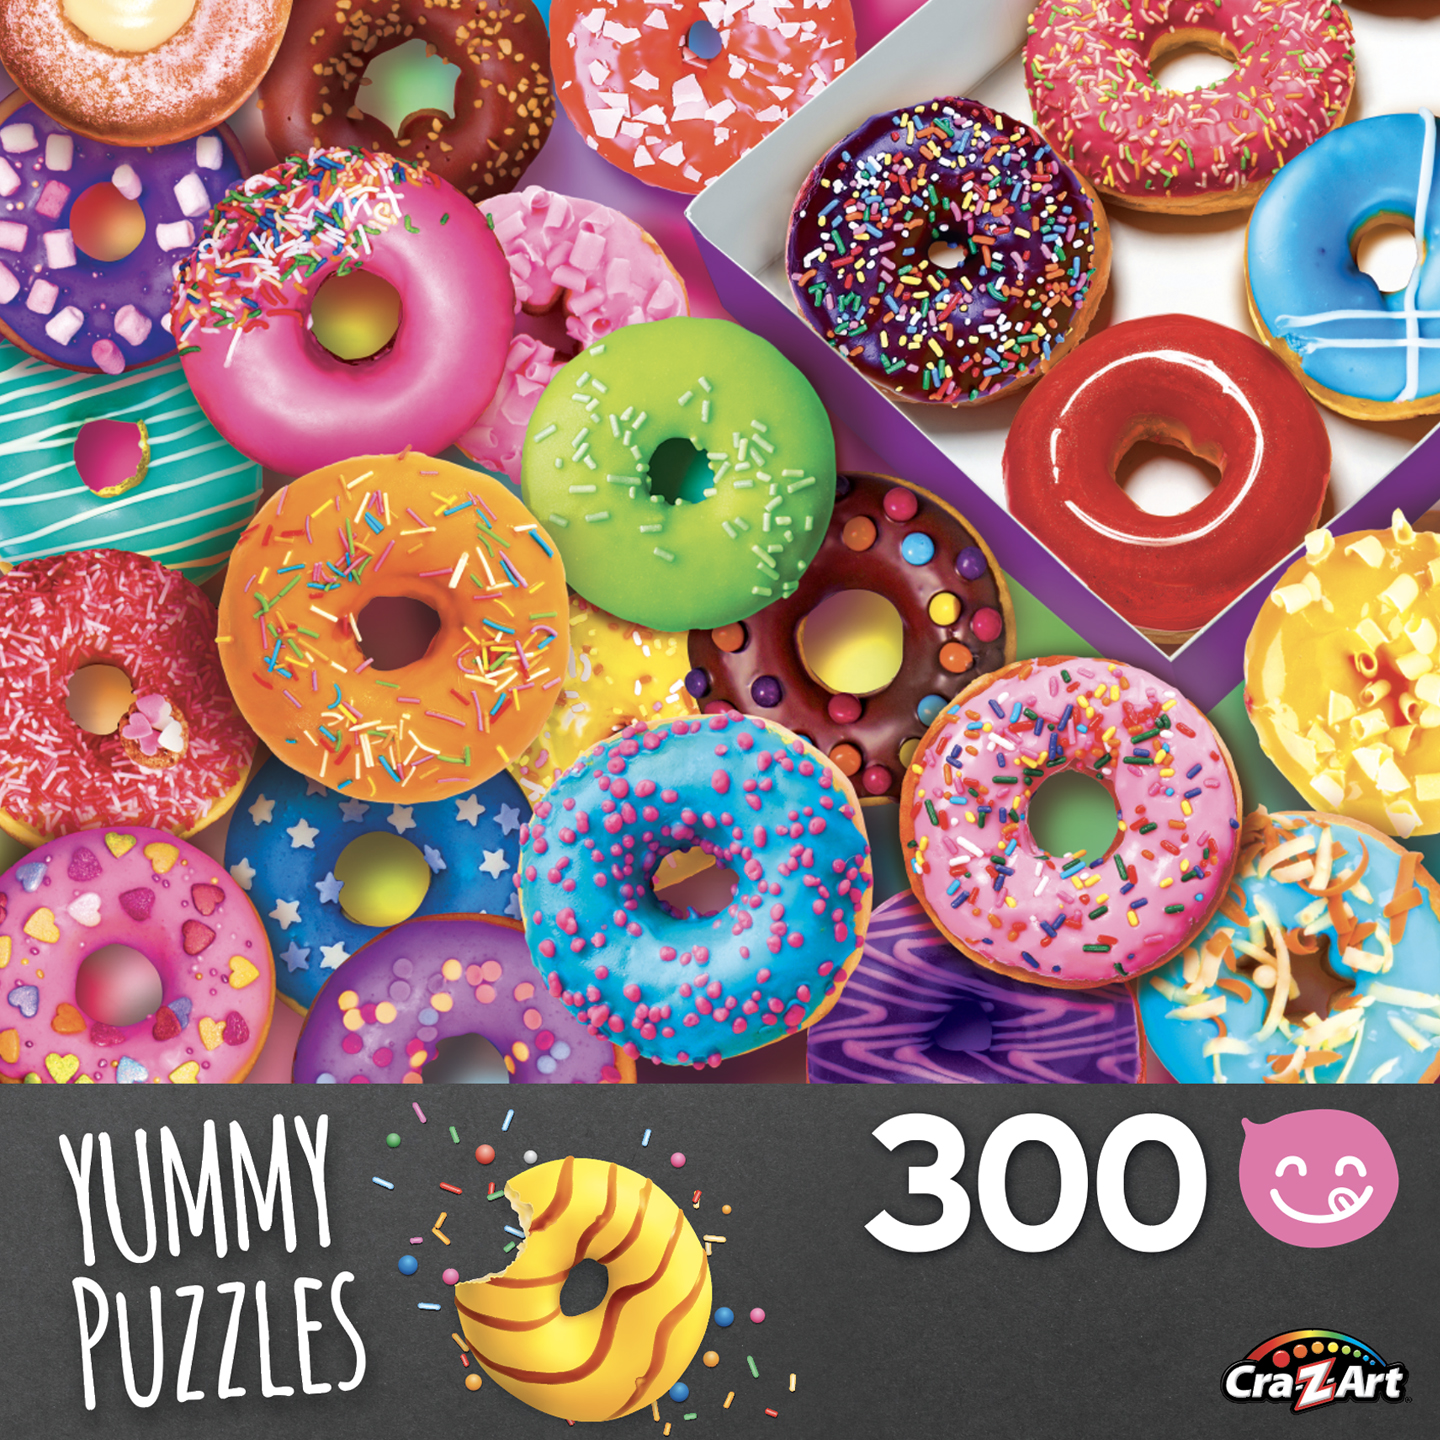 Cra-Z-Art Yummy Puzzles 300-Piece I Love Donuts Jigsaw Puzzle - image 1 of 6